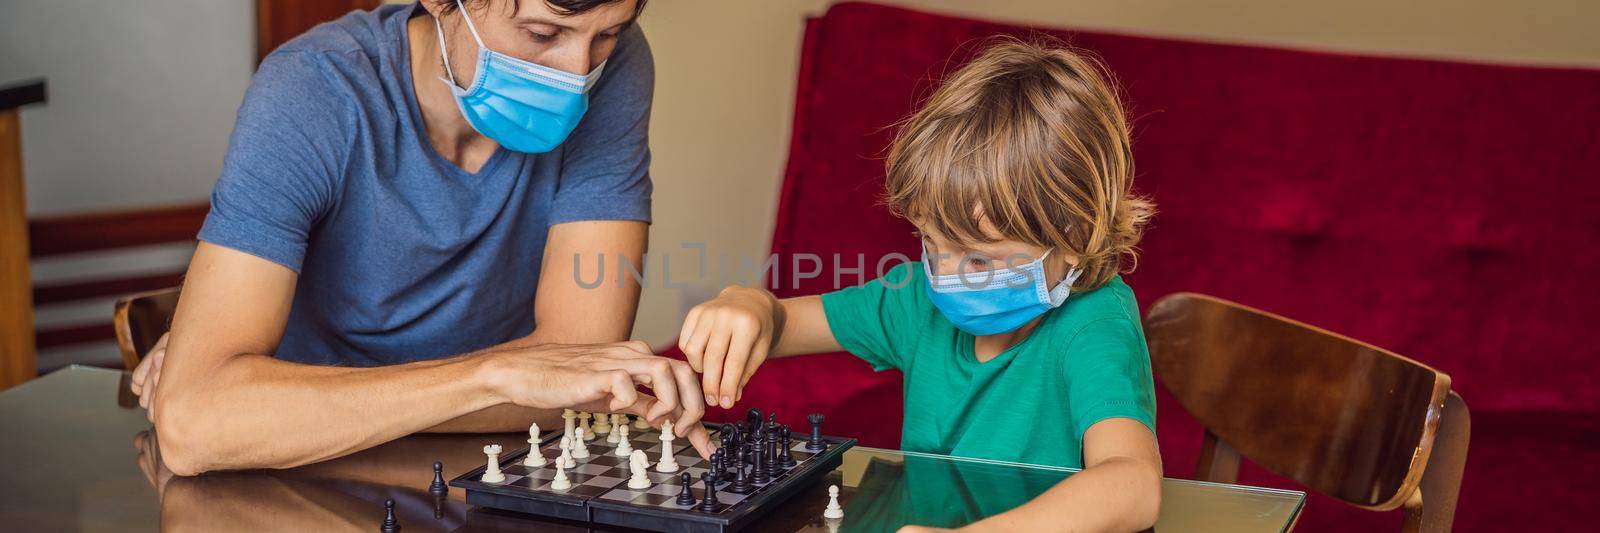 Happy Family Playing Board Game At Home. Stay at home due to quarantine. Coronovirus infection. BANNER, LONG FORMAT